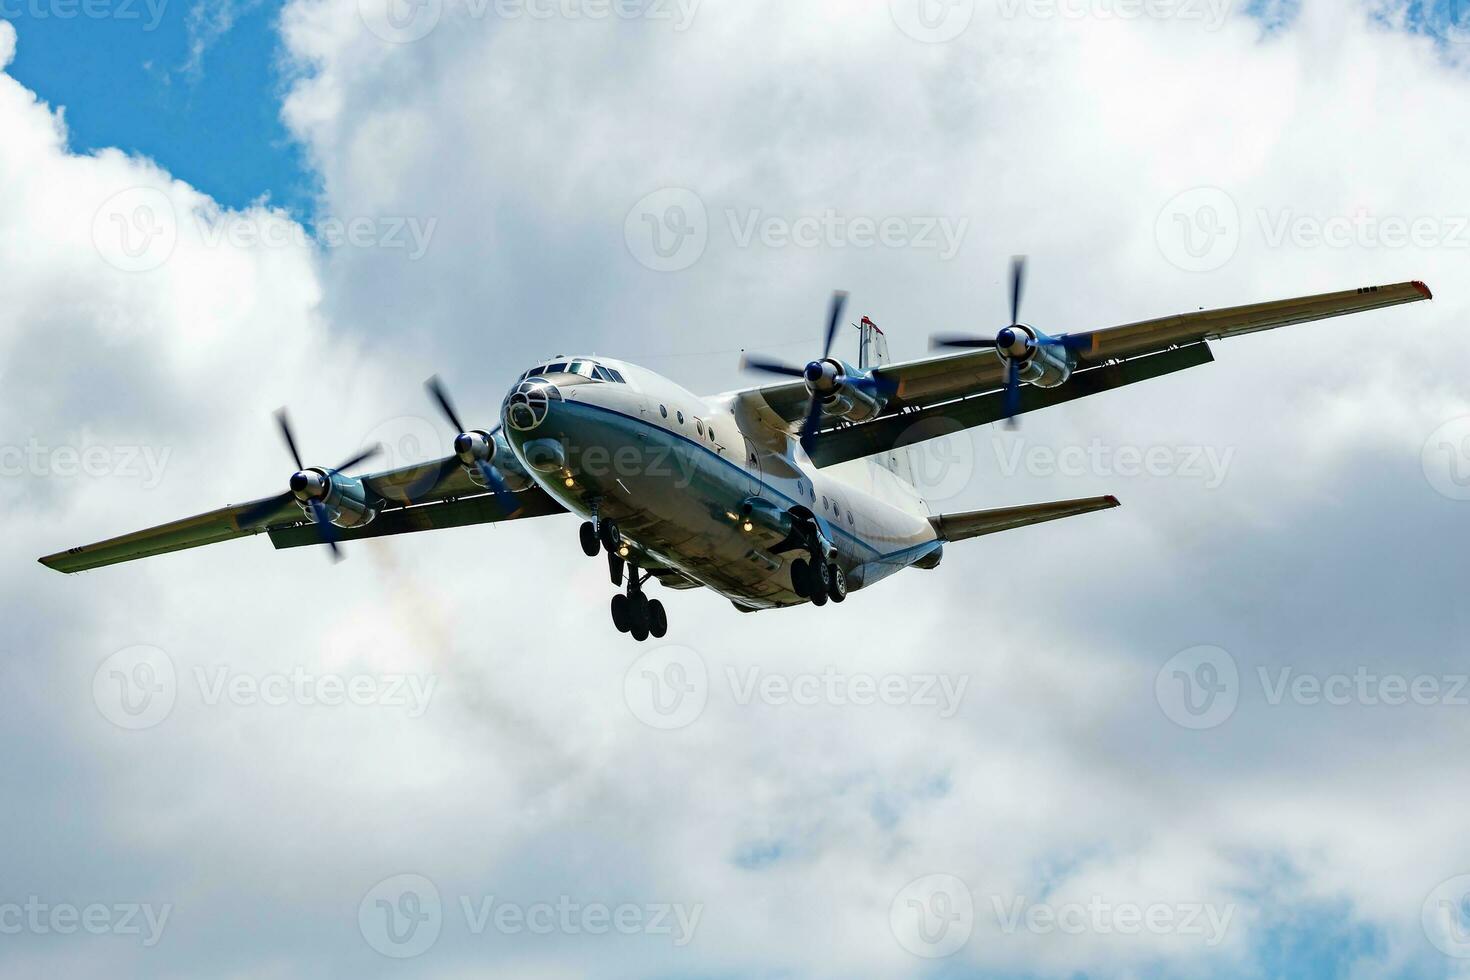 Untitled cargo plane at airport. Aviation industry and aircraft. Air transport and flight travel. International transportation. Fly and flying. Creative photography. photo